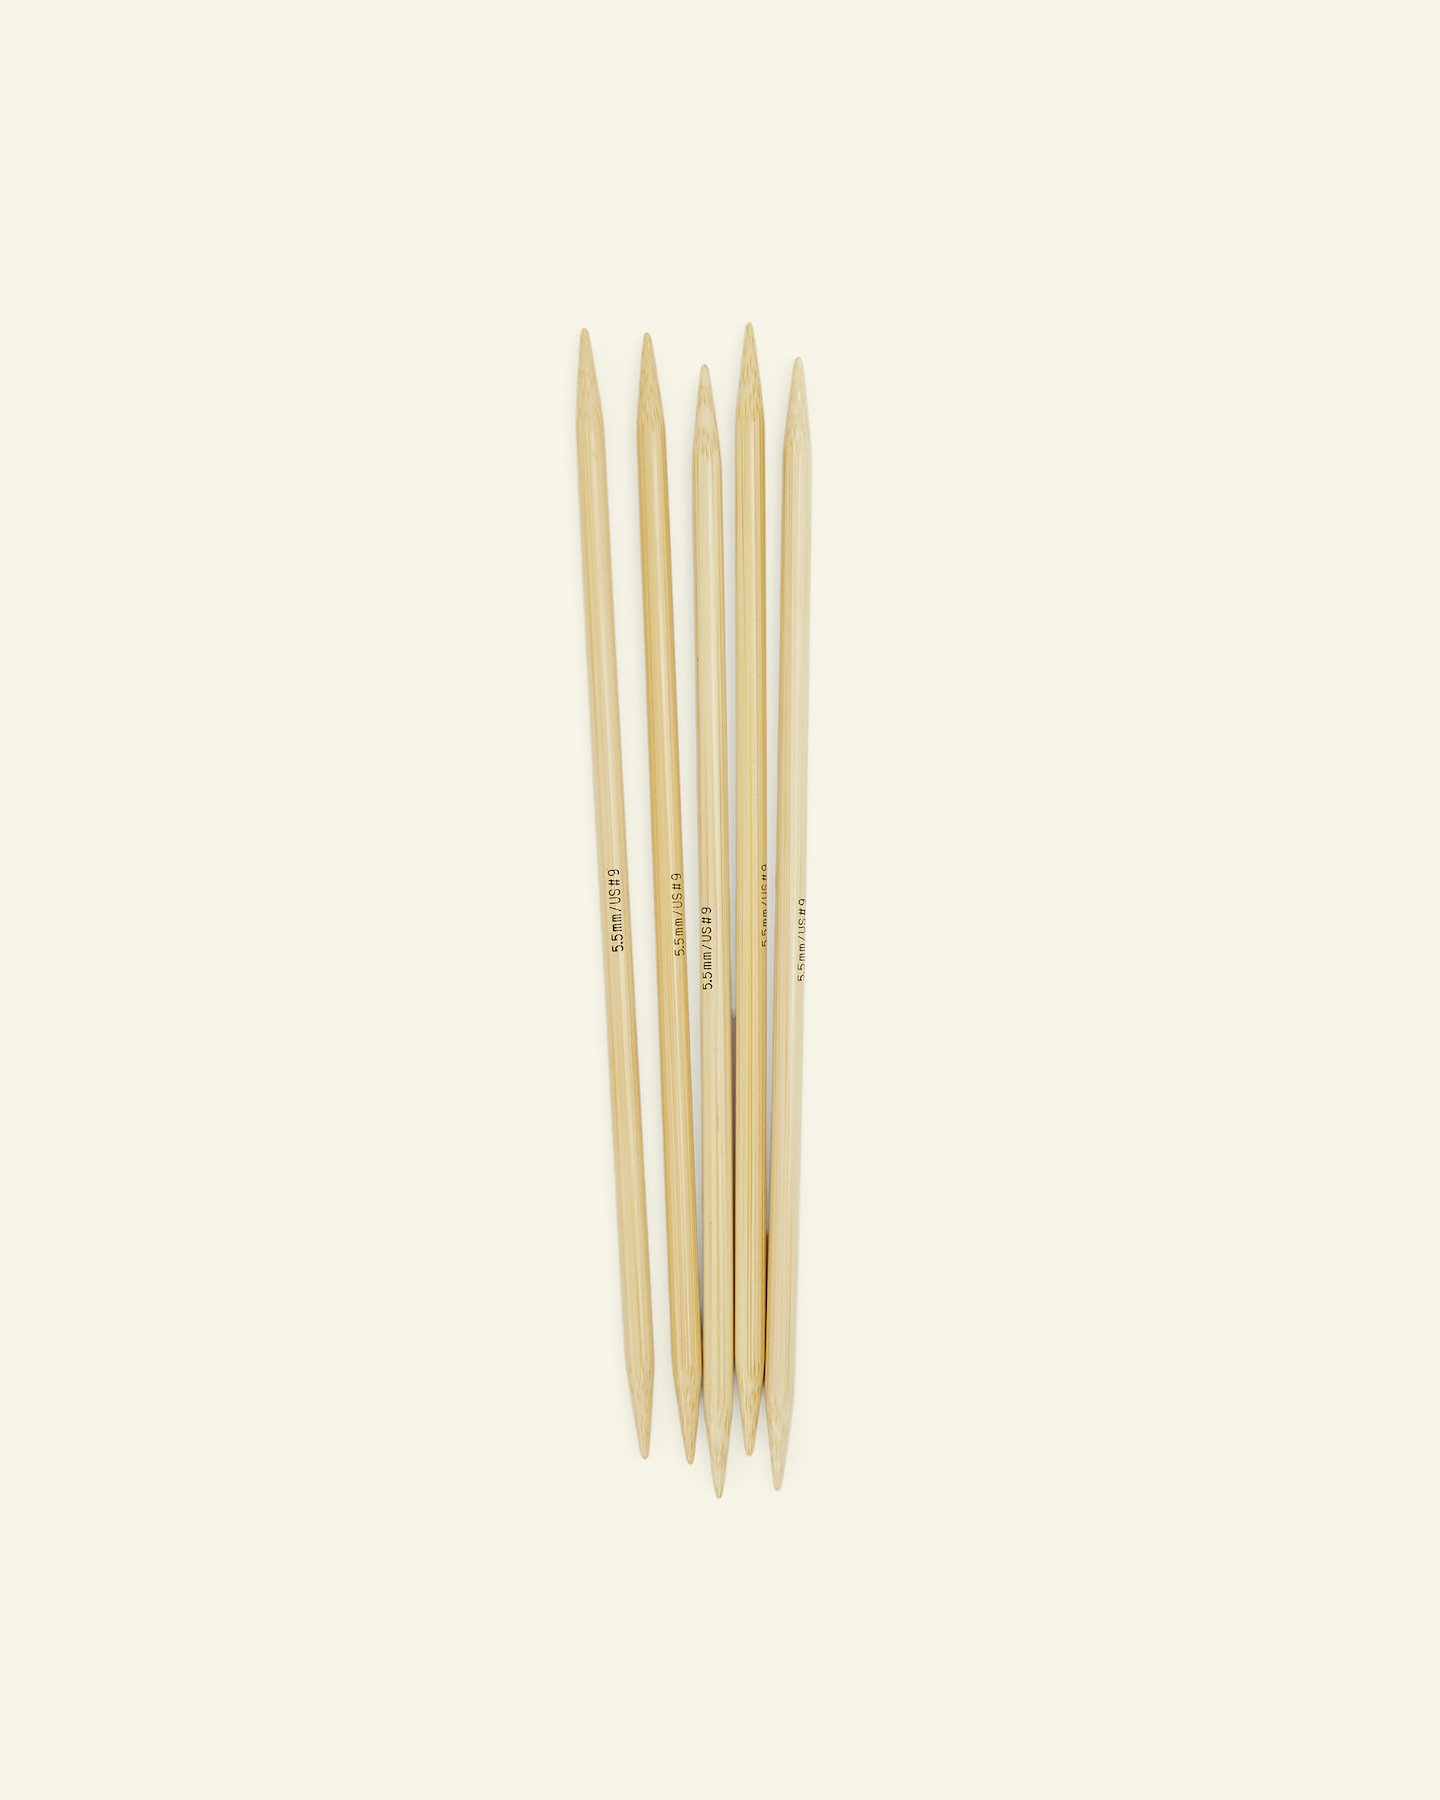 Addi dbl point. needle bamboo 20cm 5,5mm 83279_pack